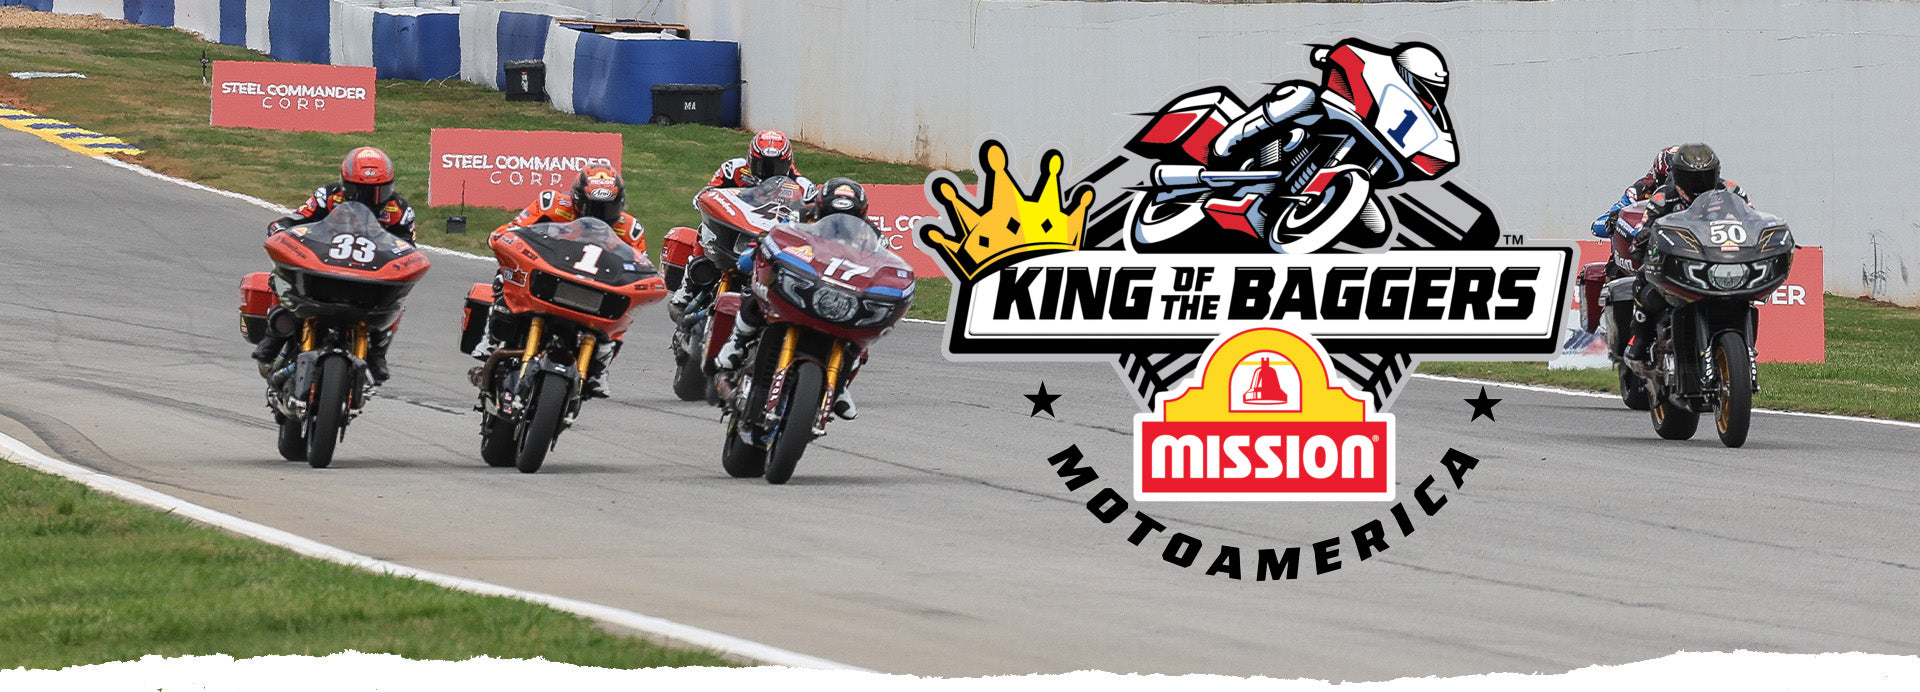 Dynamic start of a King of the Baggers race at Michelin Raceway Road Atlanta, with motorcycles charging down the track. Riders numbered 33, 1, and 17 lead a group, showcasing intense competition and speed. The image includes a vibrant promotional overlay featuring the 'King of the Baggers' and 'Mission MotoAmerica' logos, enhancing the racing theme.